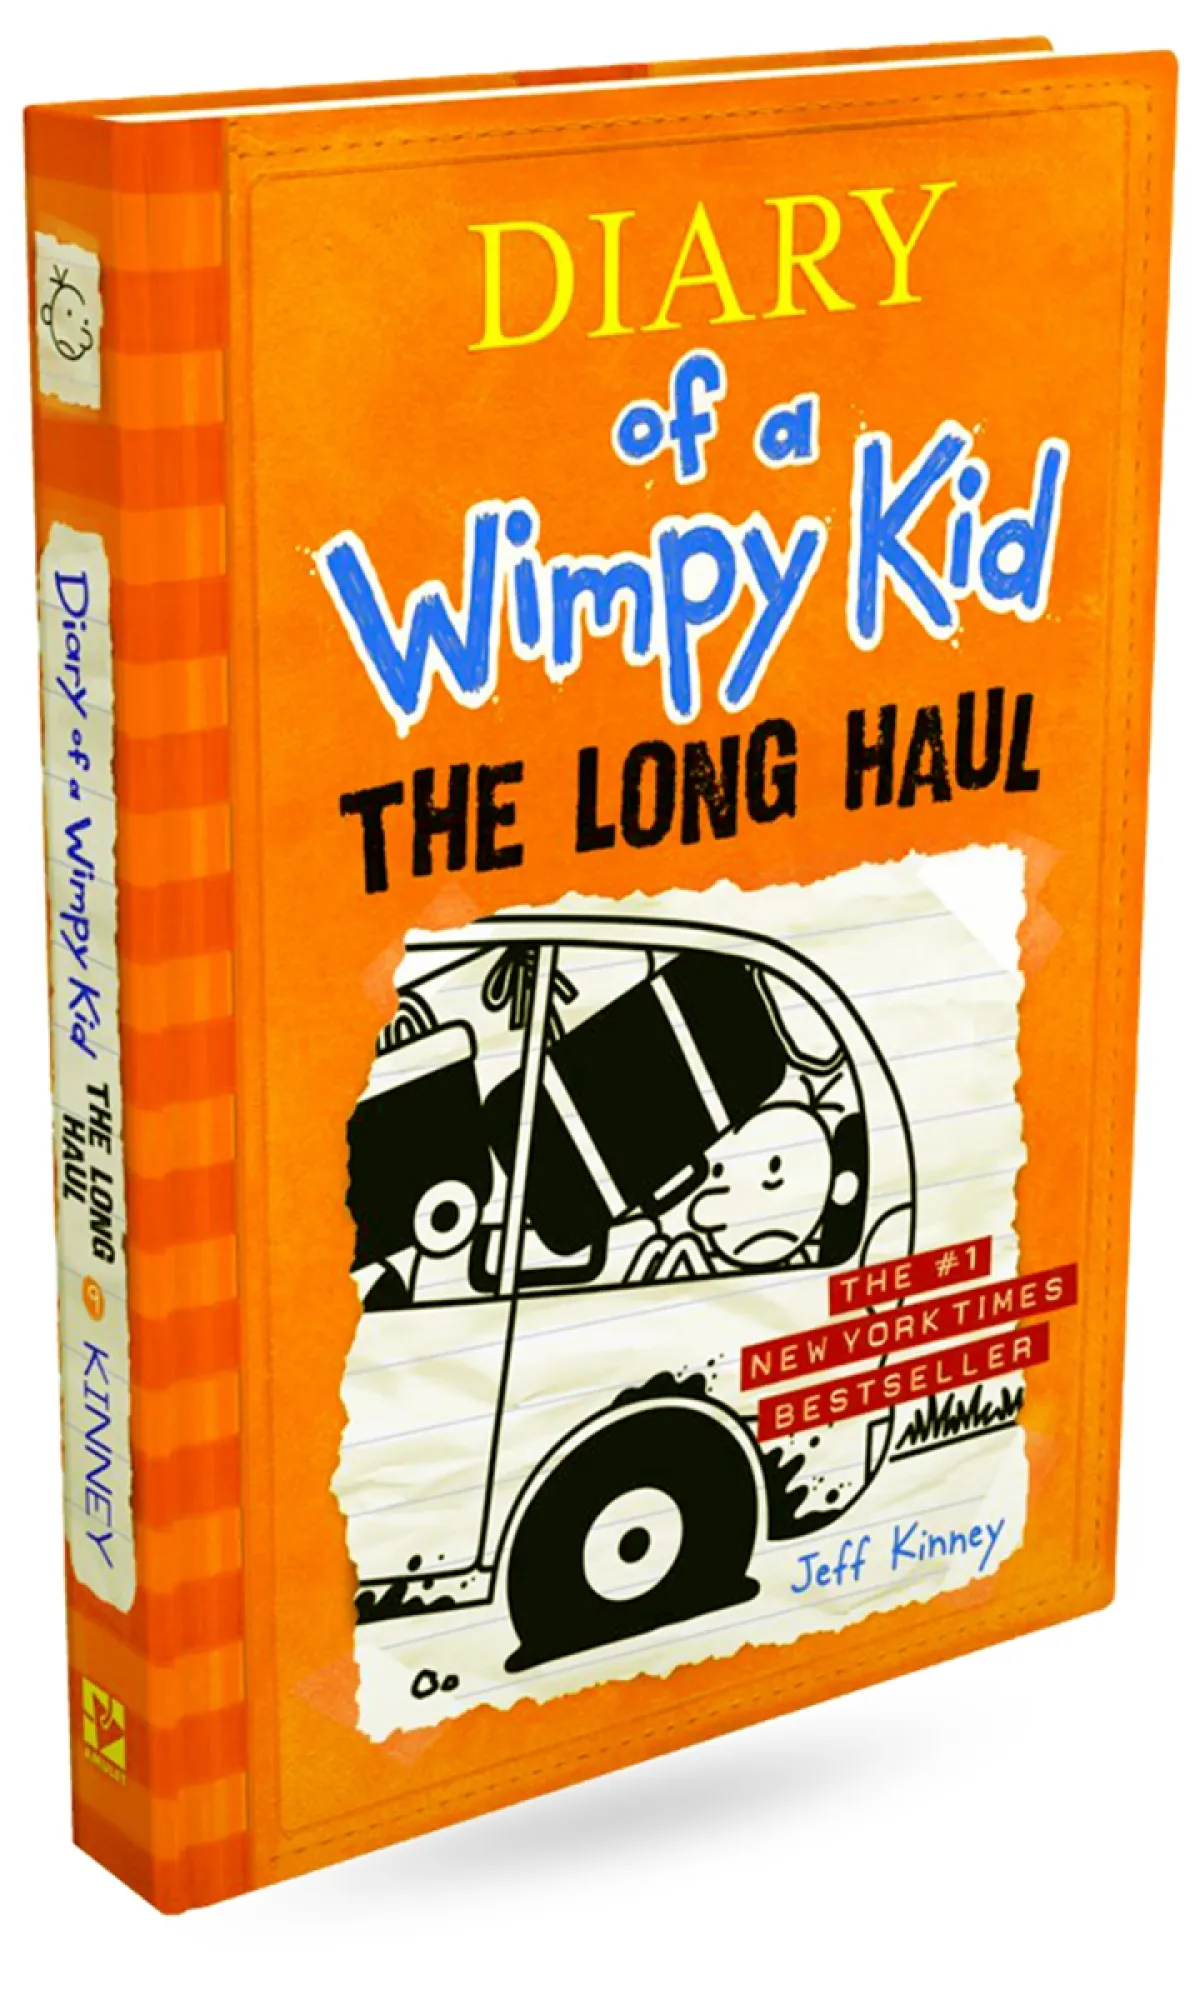 orange book with cartoon kid in car. Diary of a Wimpy Kid The Long Haul